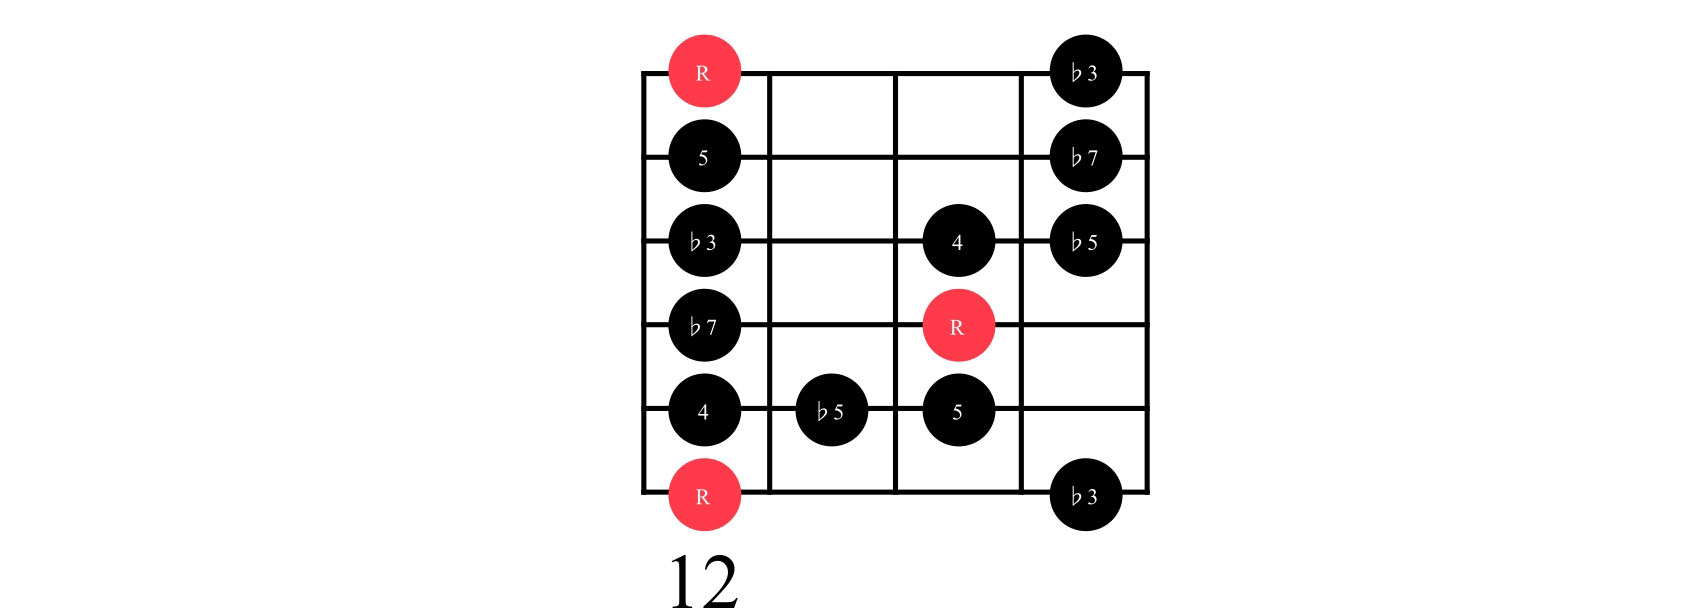 Guitar chord diagram of E Minor Blues Box 1, with red-marked root notes (R), black-marked intervals, and fret number 12, outlining positions for guitar fingering.